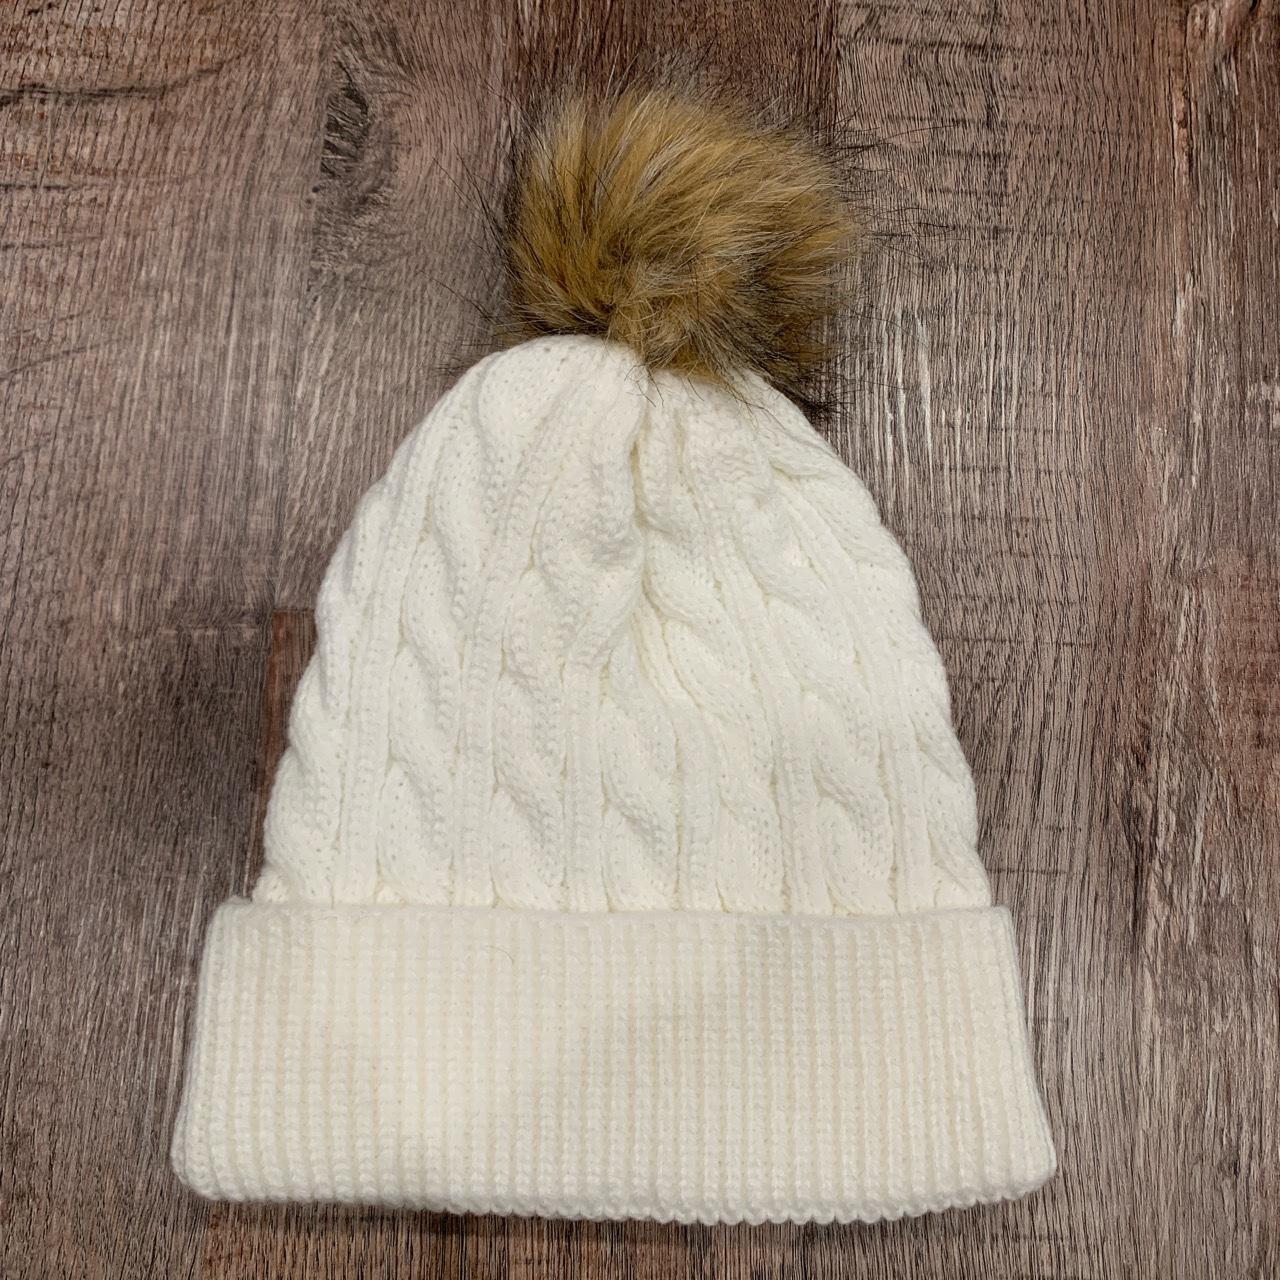 Product Image 4 - ❄️ Women’s Winter Hat Knitted